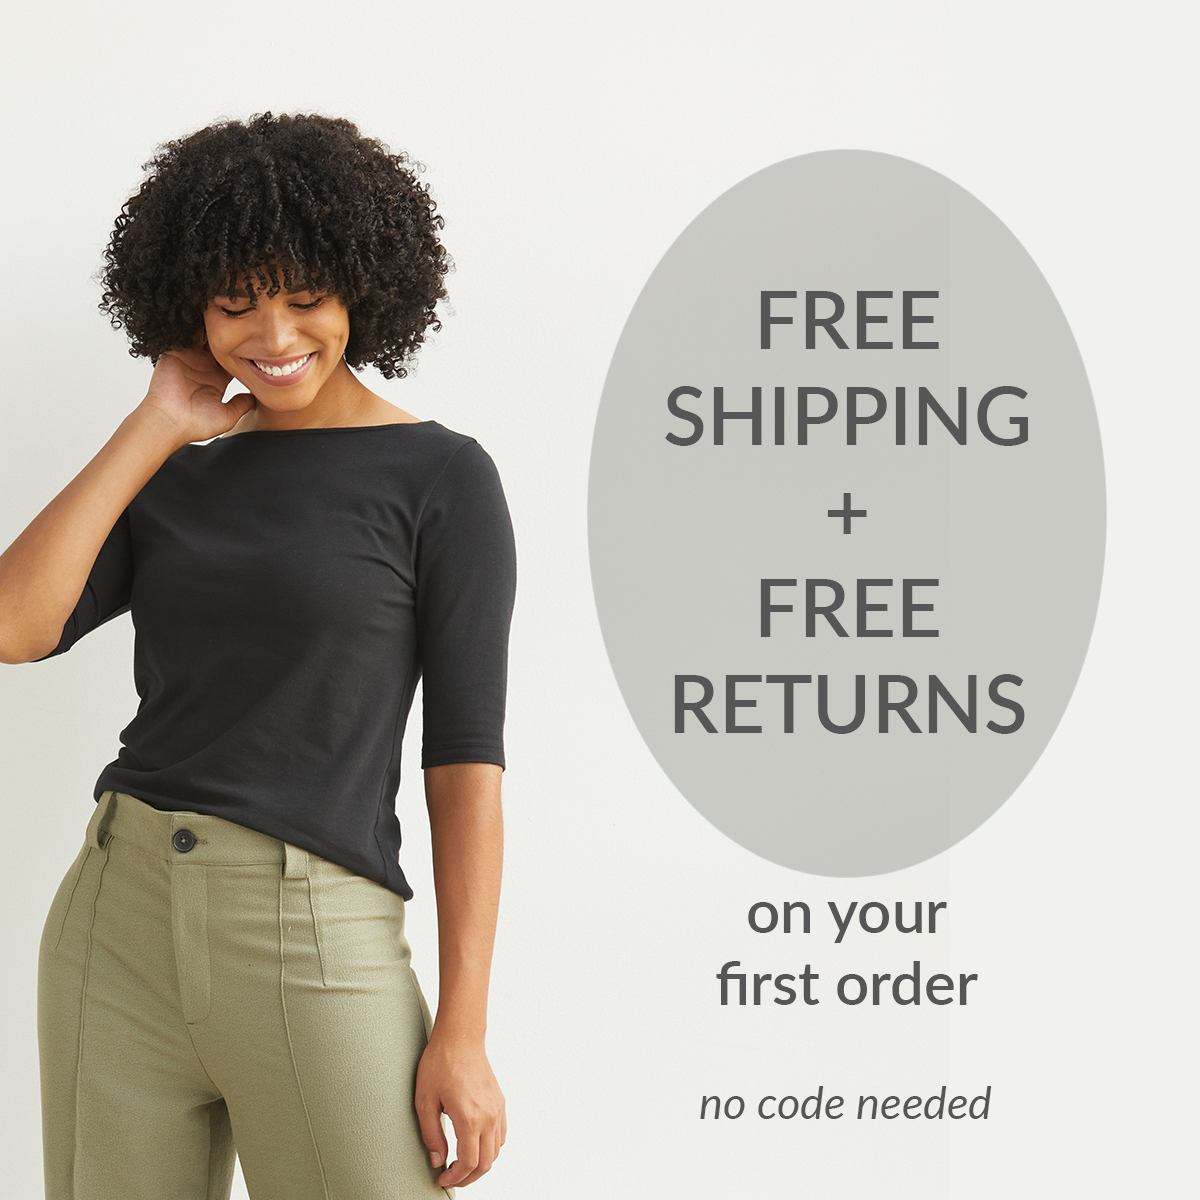 free shipping and free returns shop now